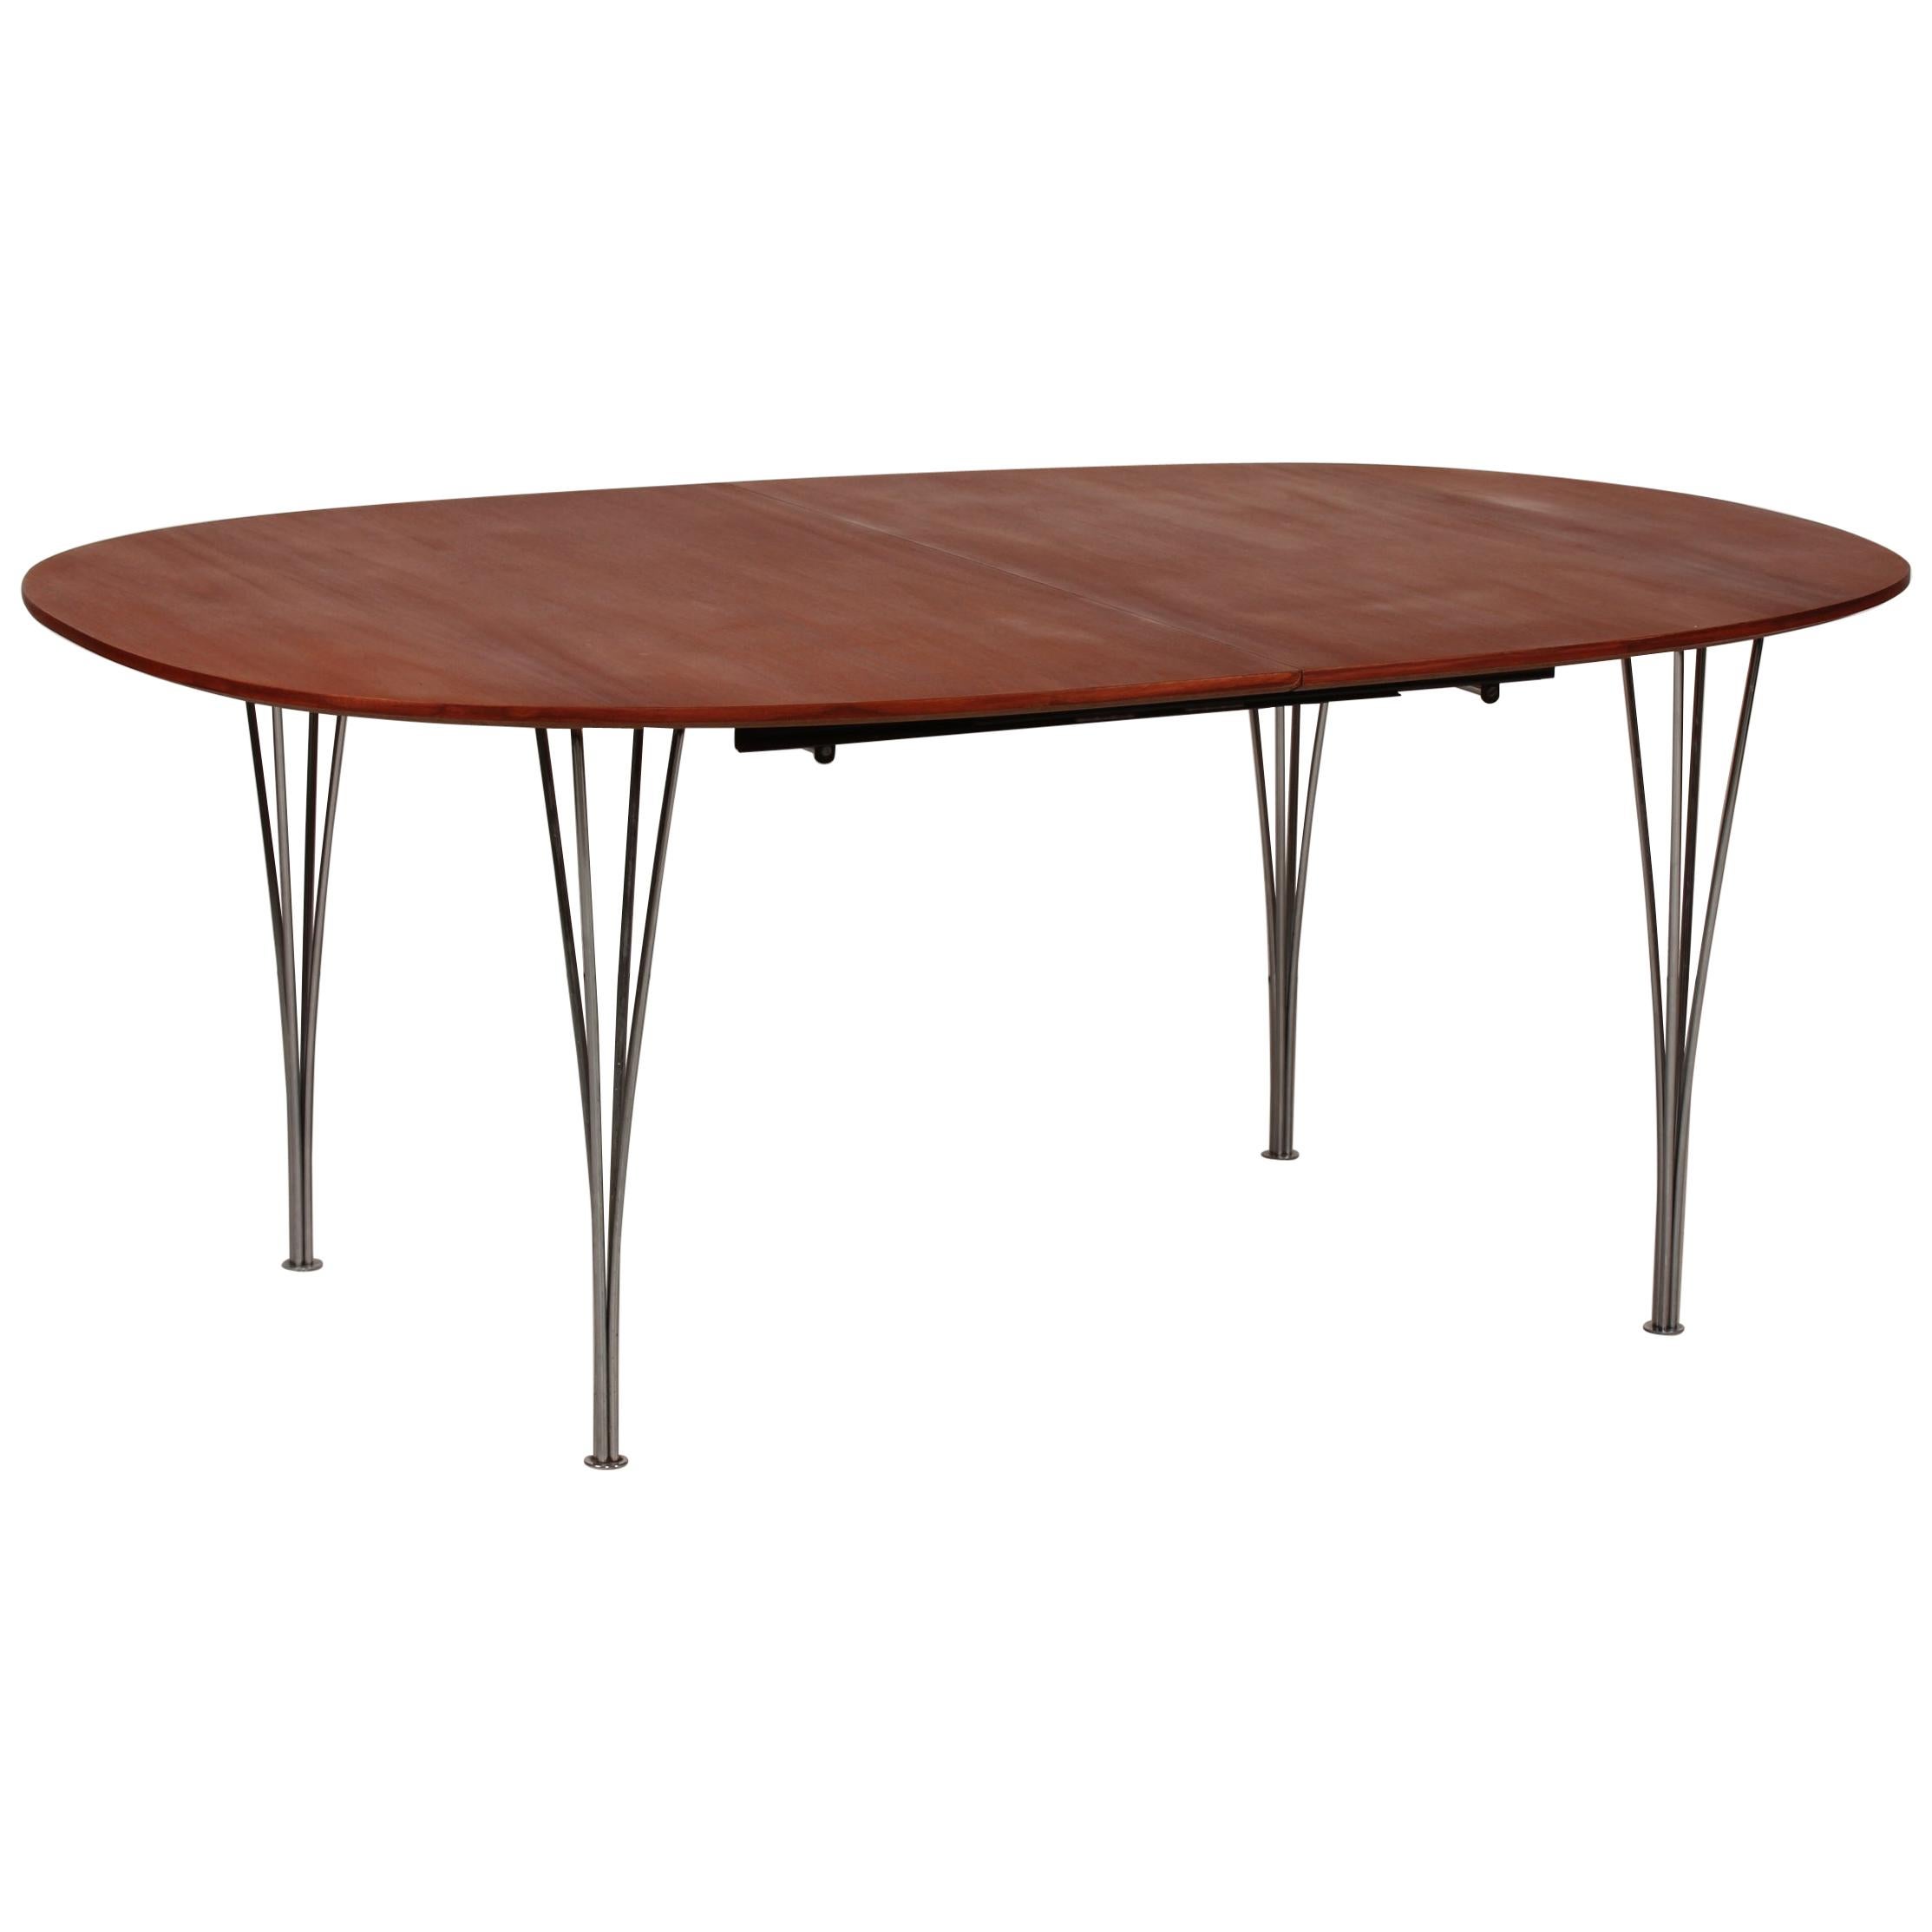 Piet Hein & Bruno Mathsson Super Ellipse Table Extension of Oiled Mahogany, 1993